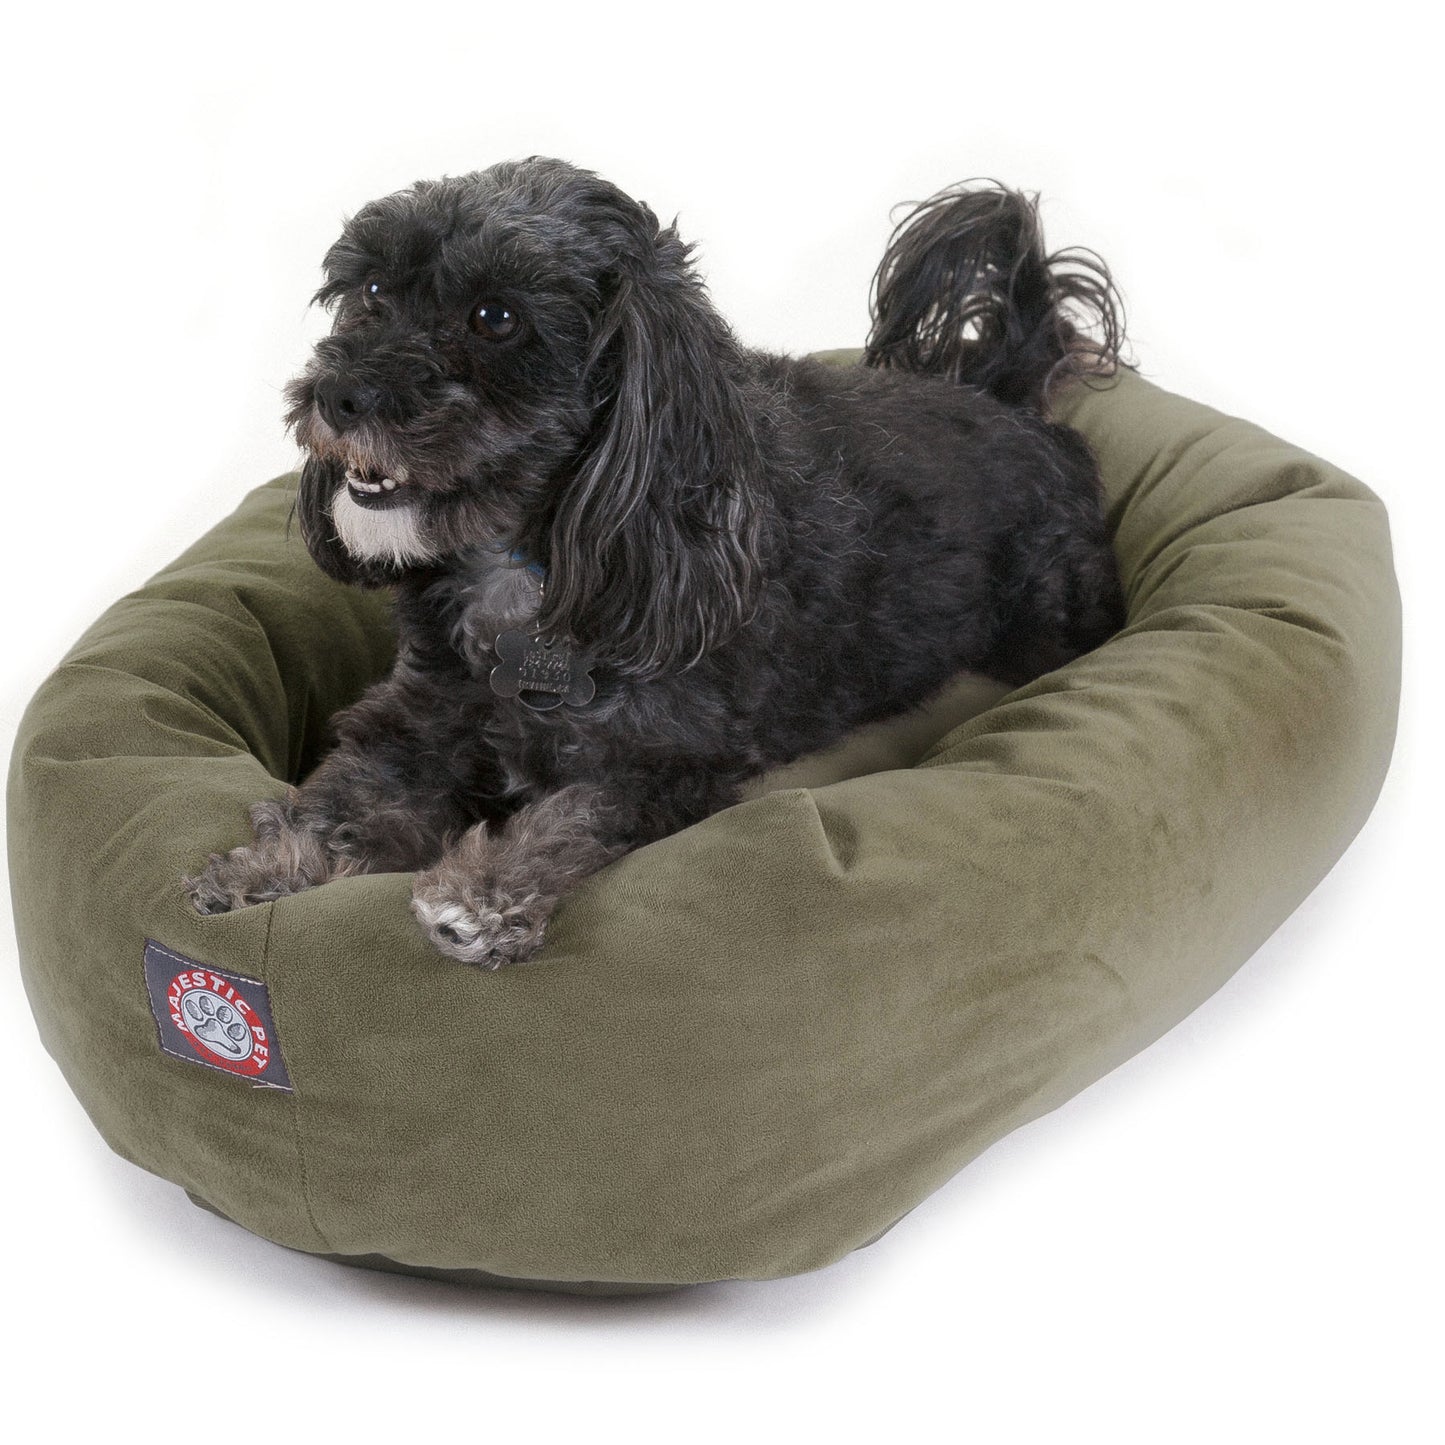 Majestic Pet Suede Bagel Dog Bed Machine Washable Chocolate Large 40" X 29" X 9"